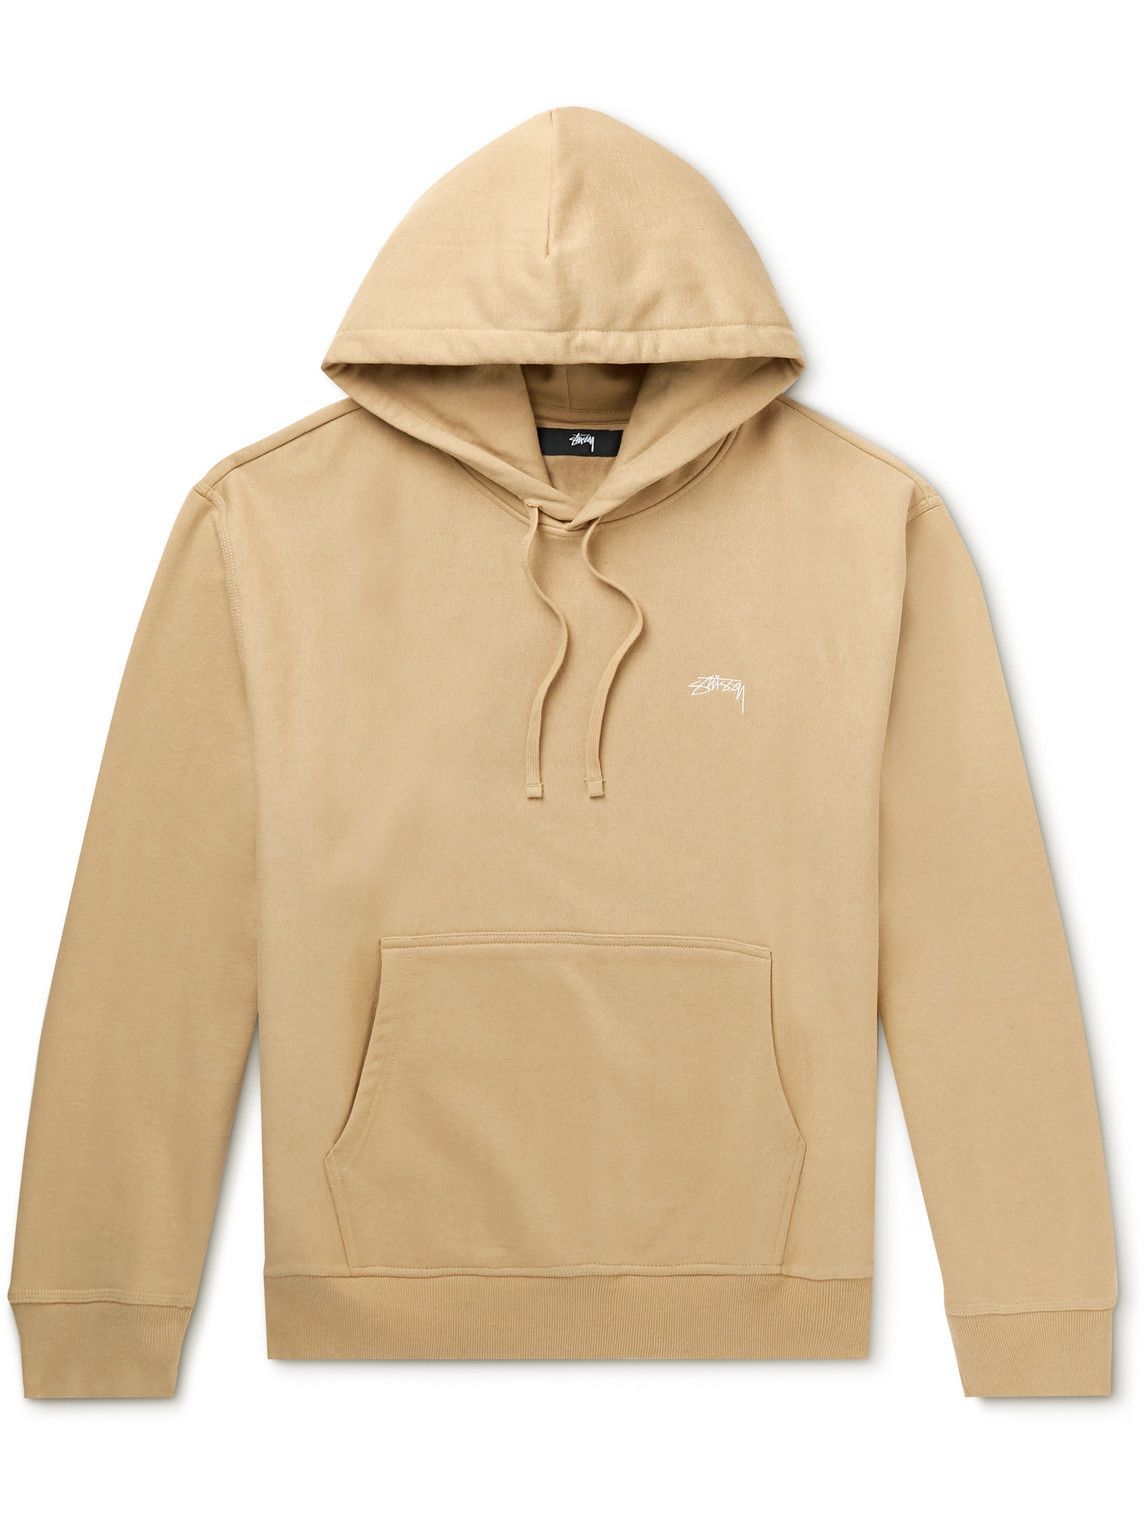 Stussy - Logo-Embroidered Cotton-Jersey Hoodie - Brown Stussy